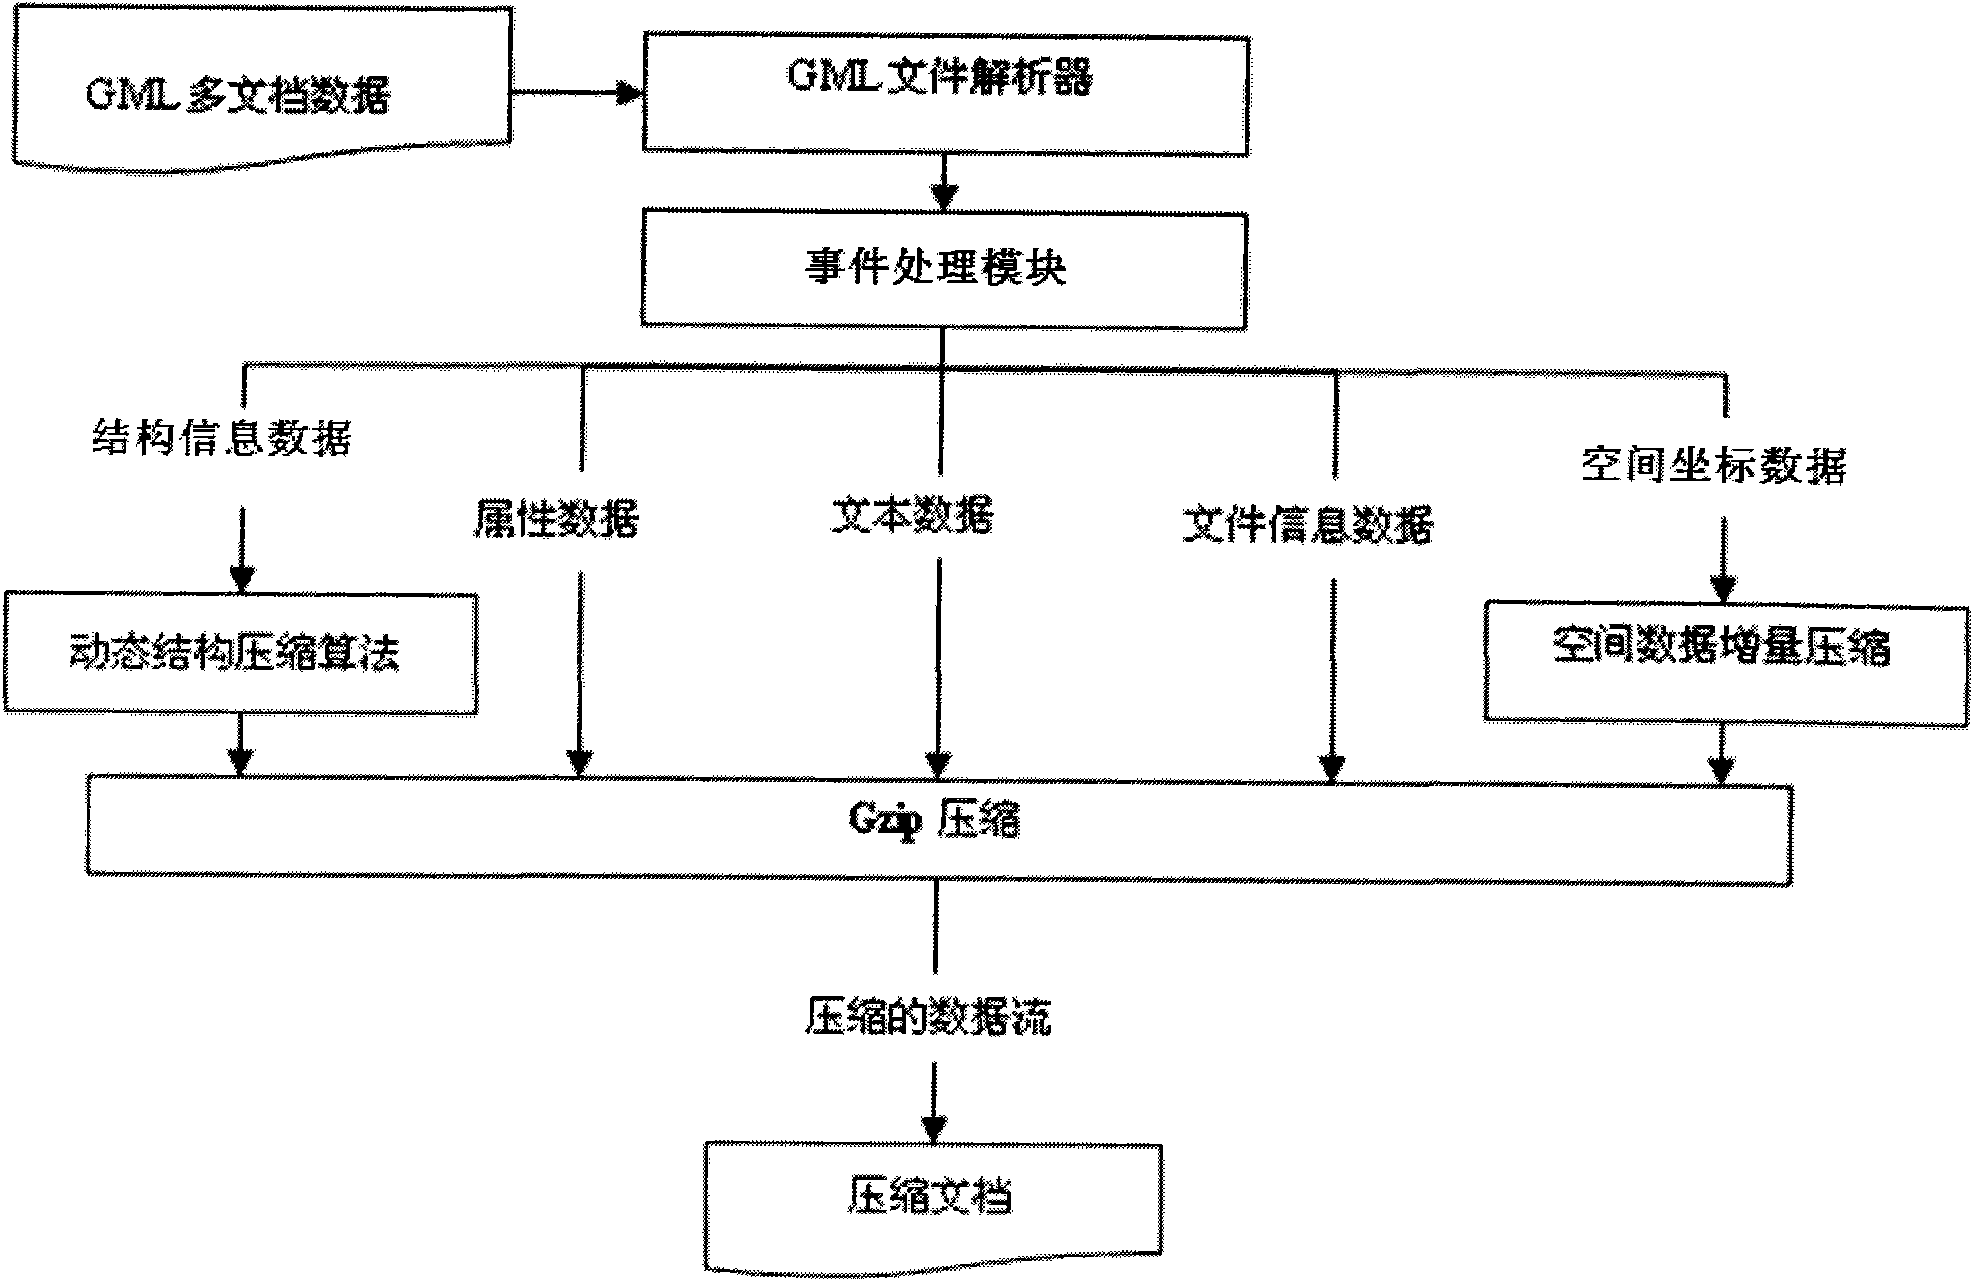 High performance geography markup language (GML) multi-document stream compression information processing method